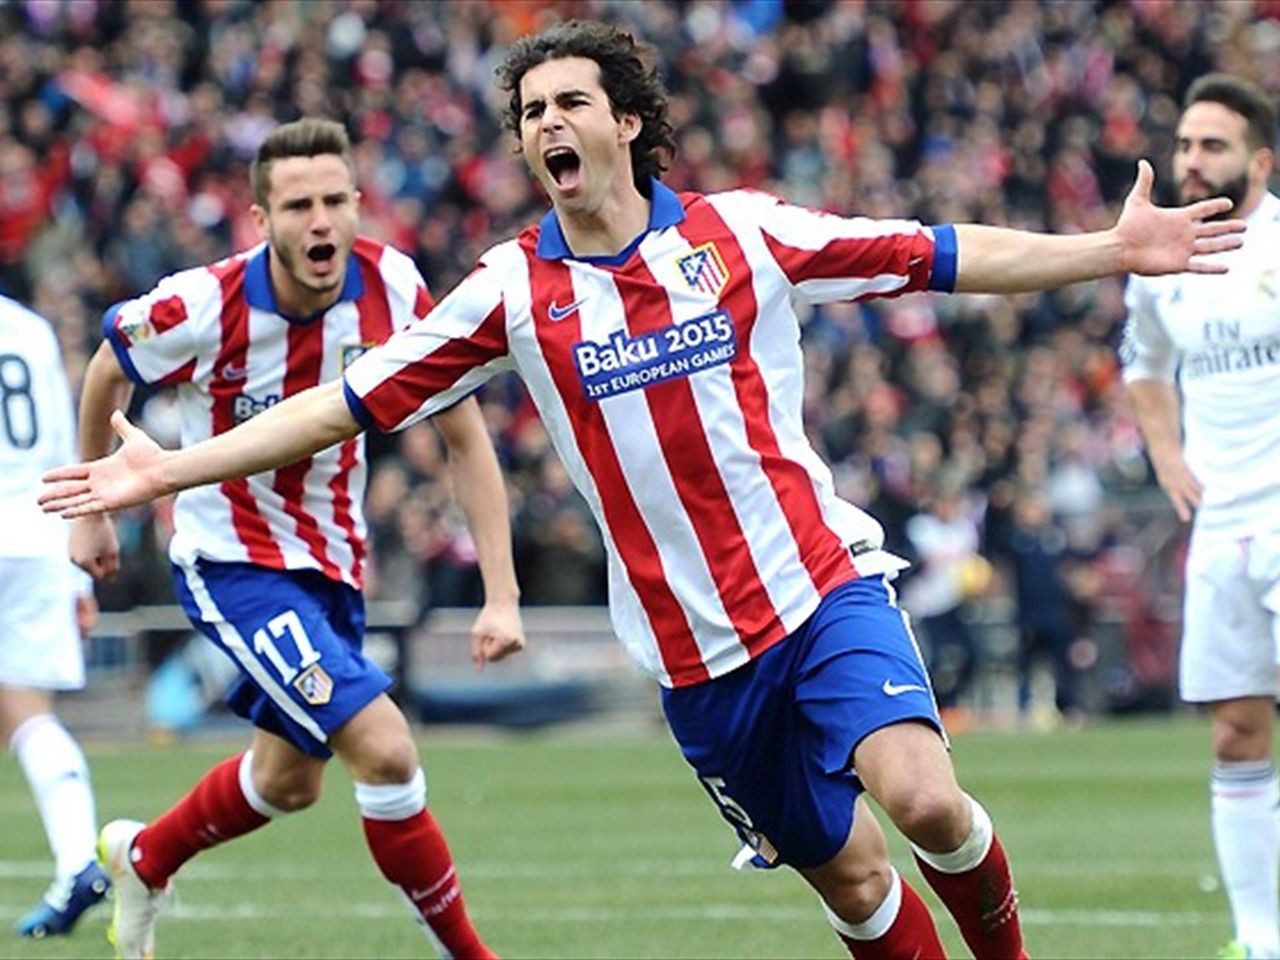 Atletico Madrid run riot over rivals Real